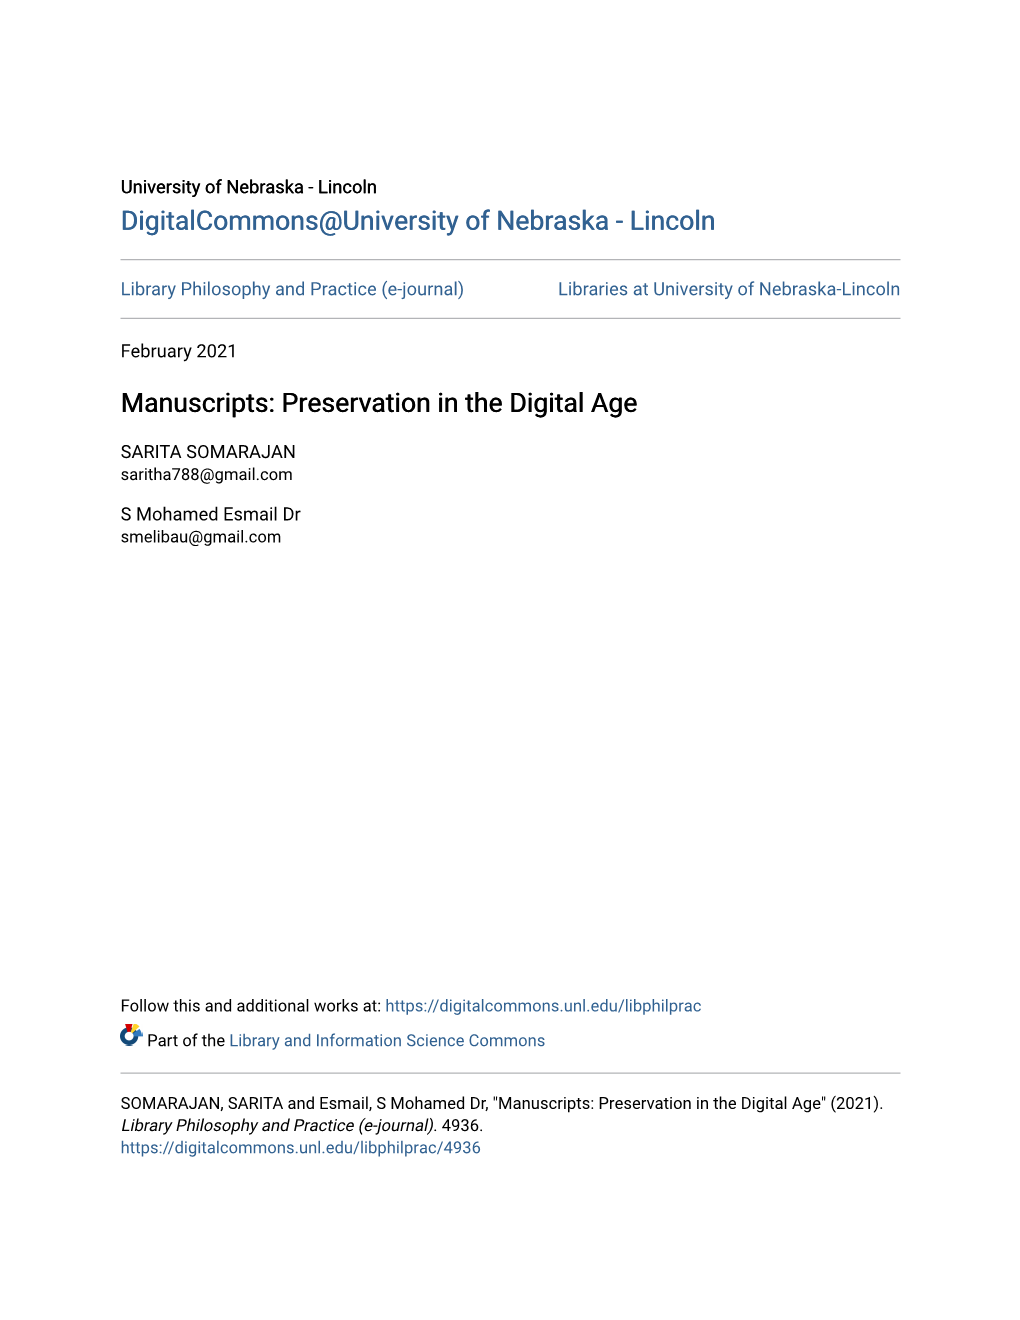 Manuscripts: Preservation in the Digital Age